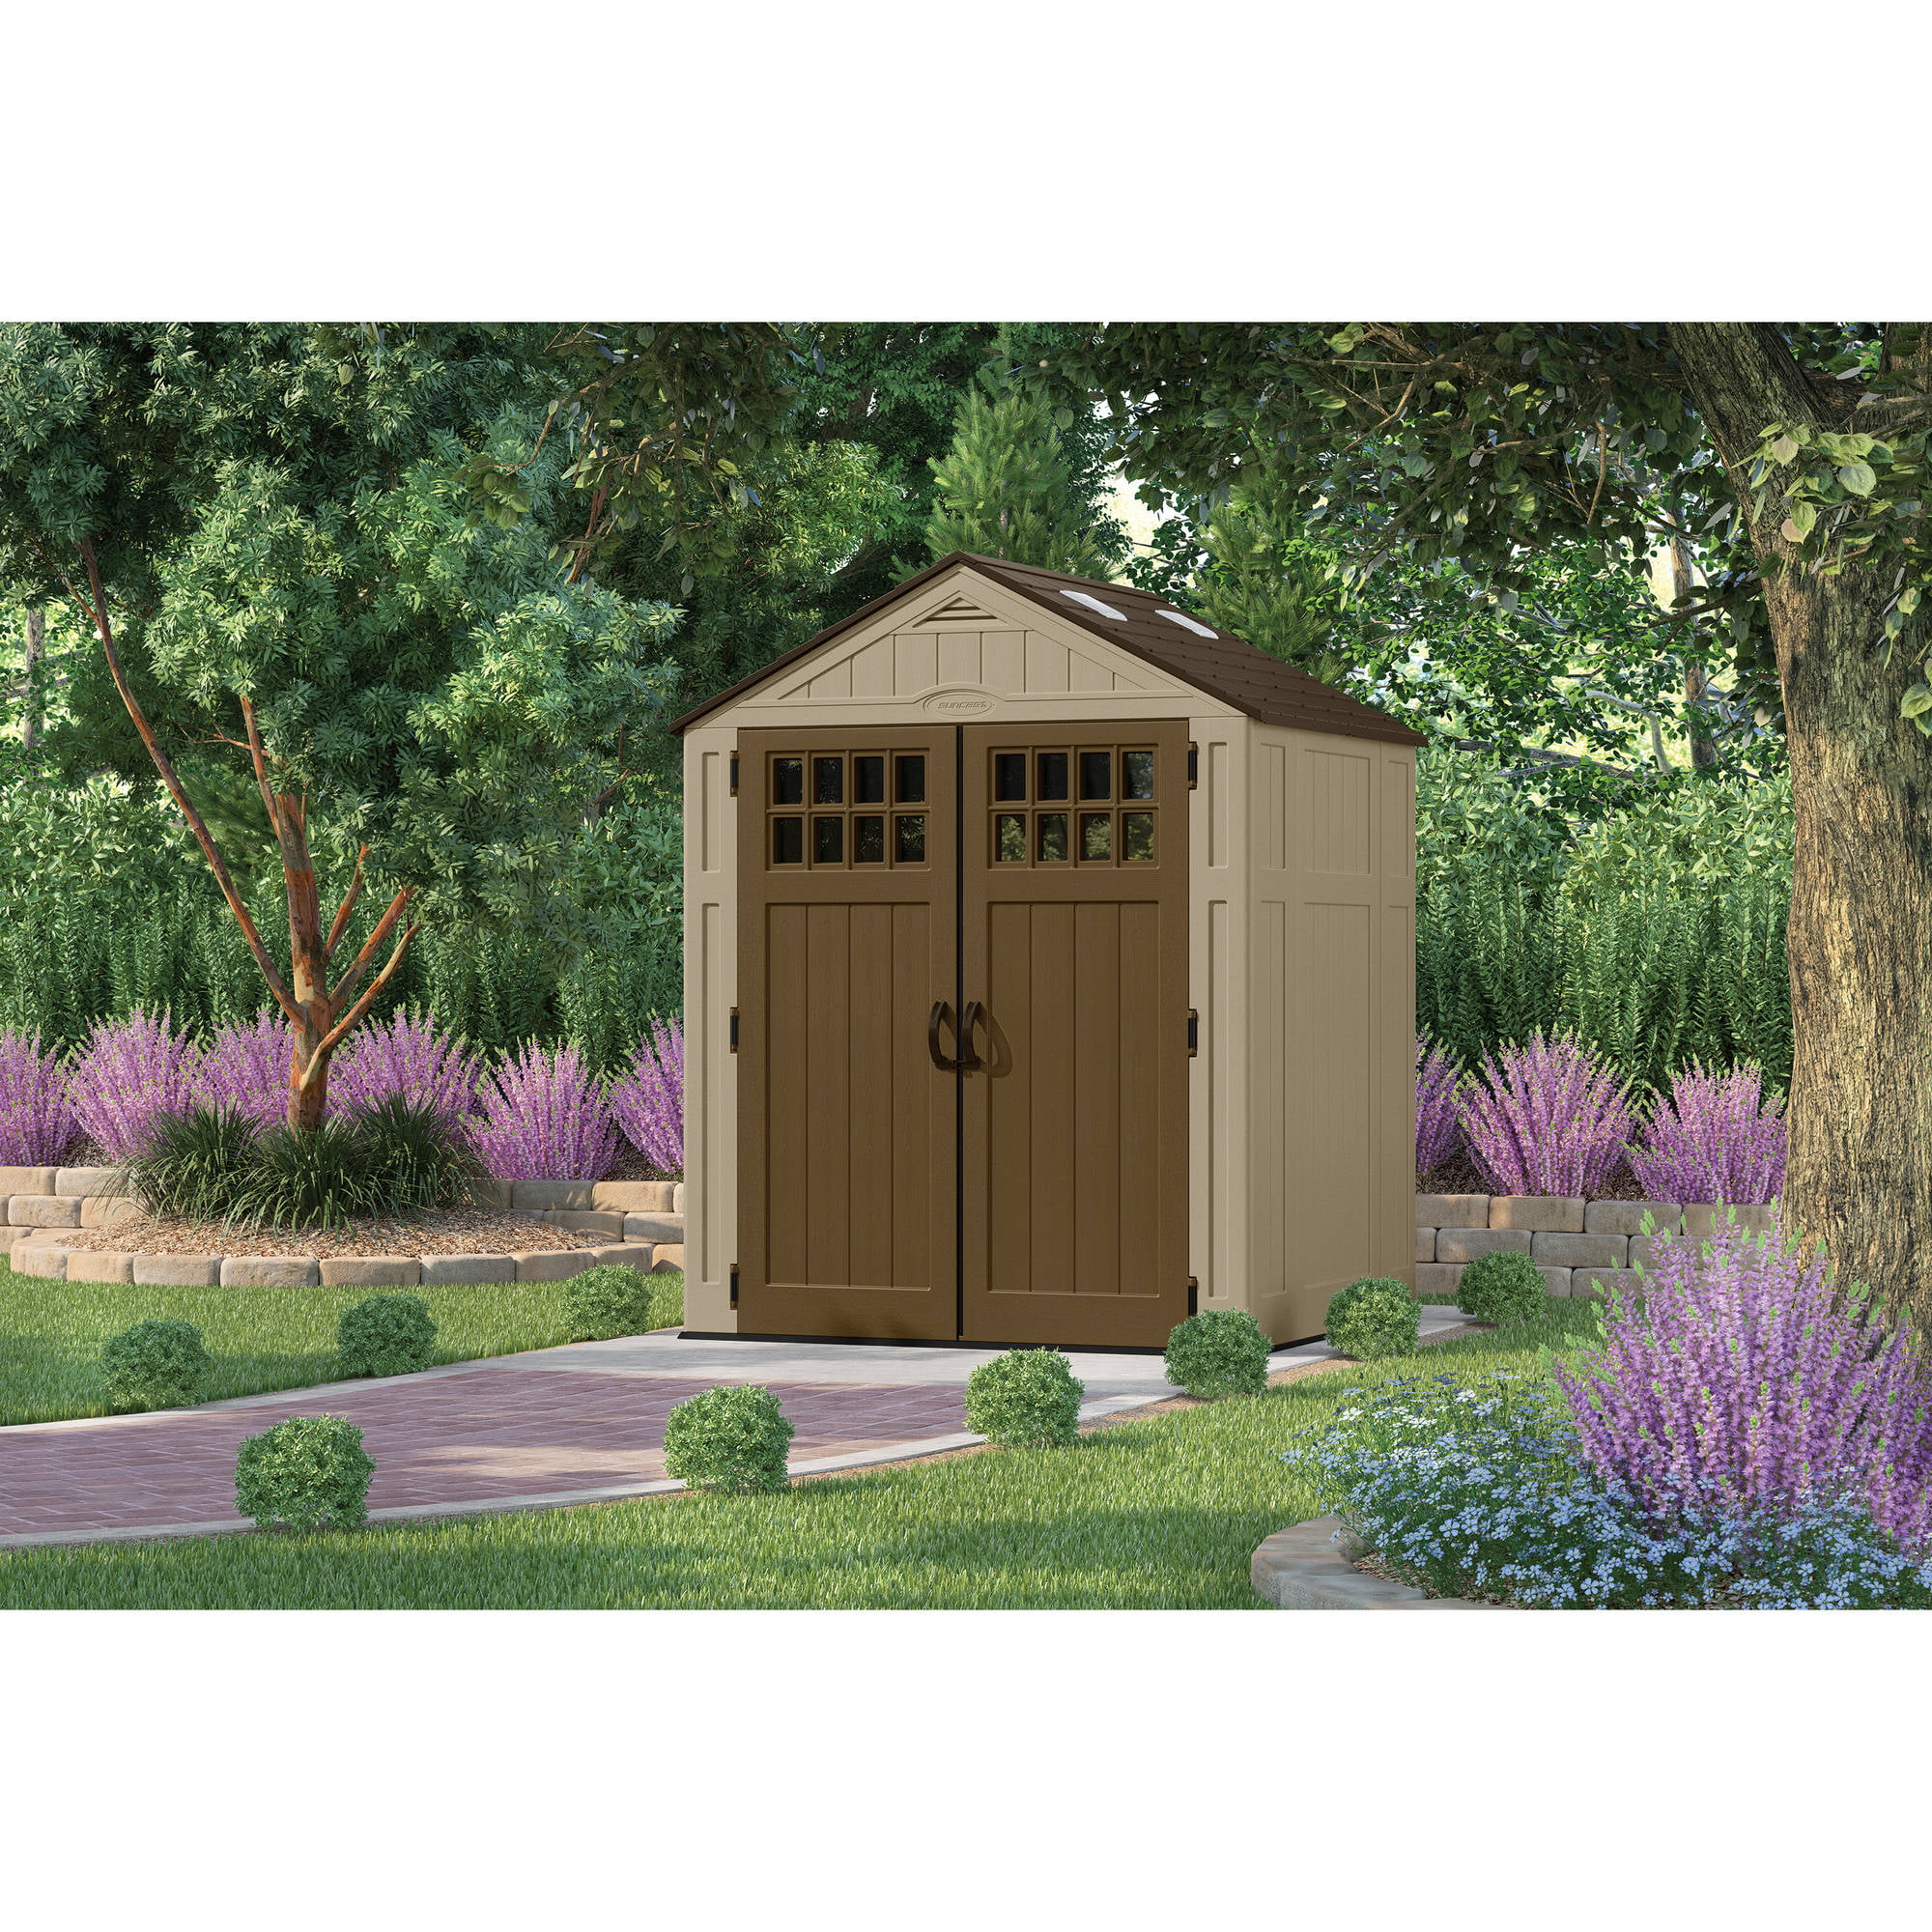 Fresh Home Depot Sheds Keter Insured By Ross